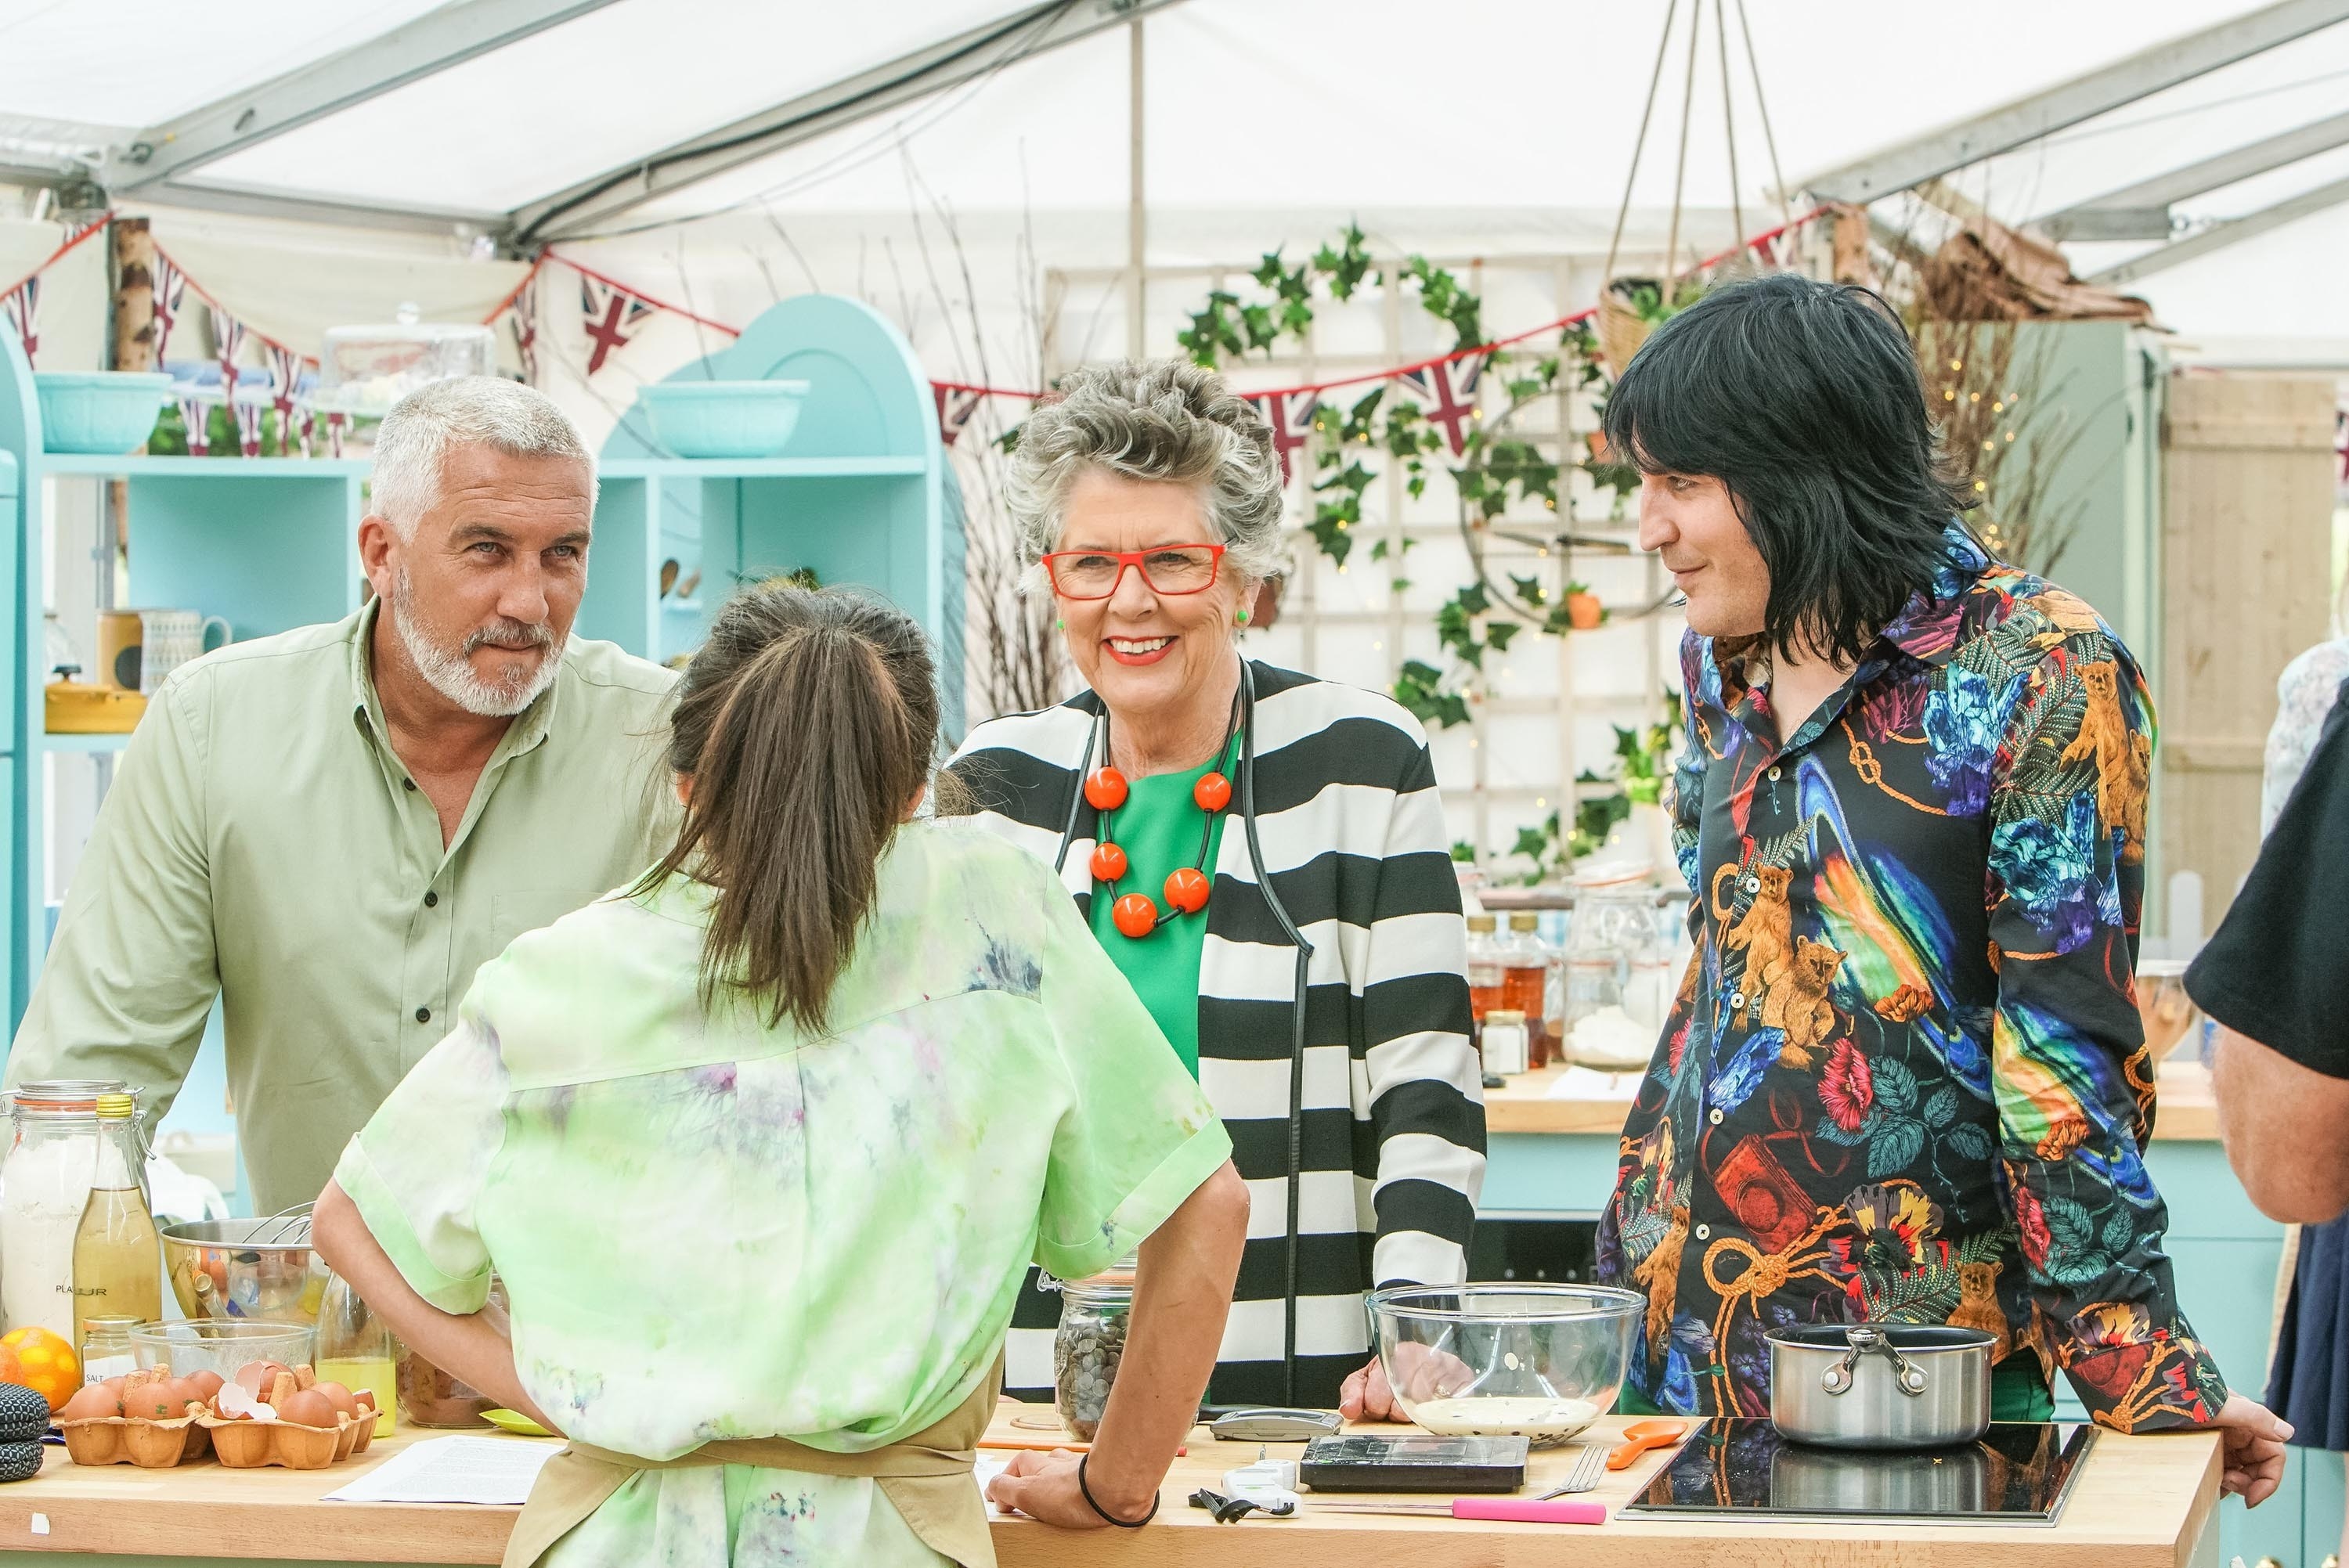 Paul Hollywood, Mary Berry, and Noel Fielding chatting with a contestant.